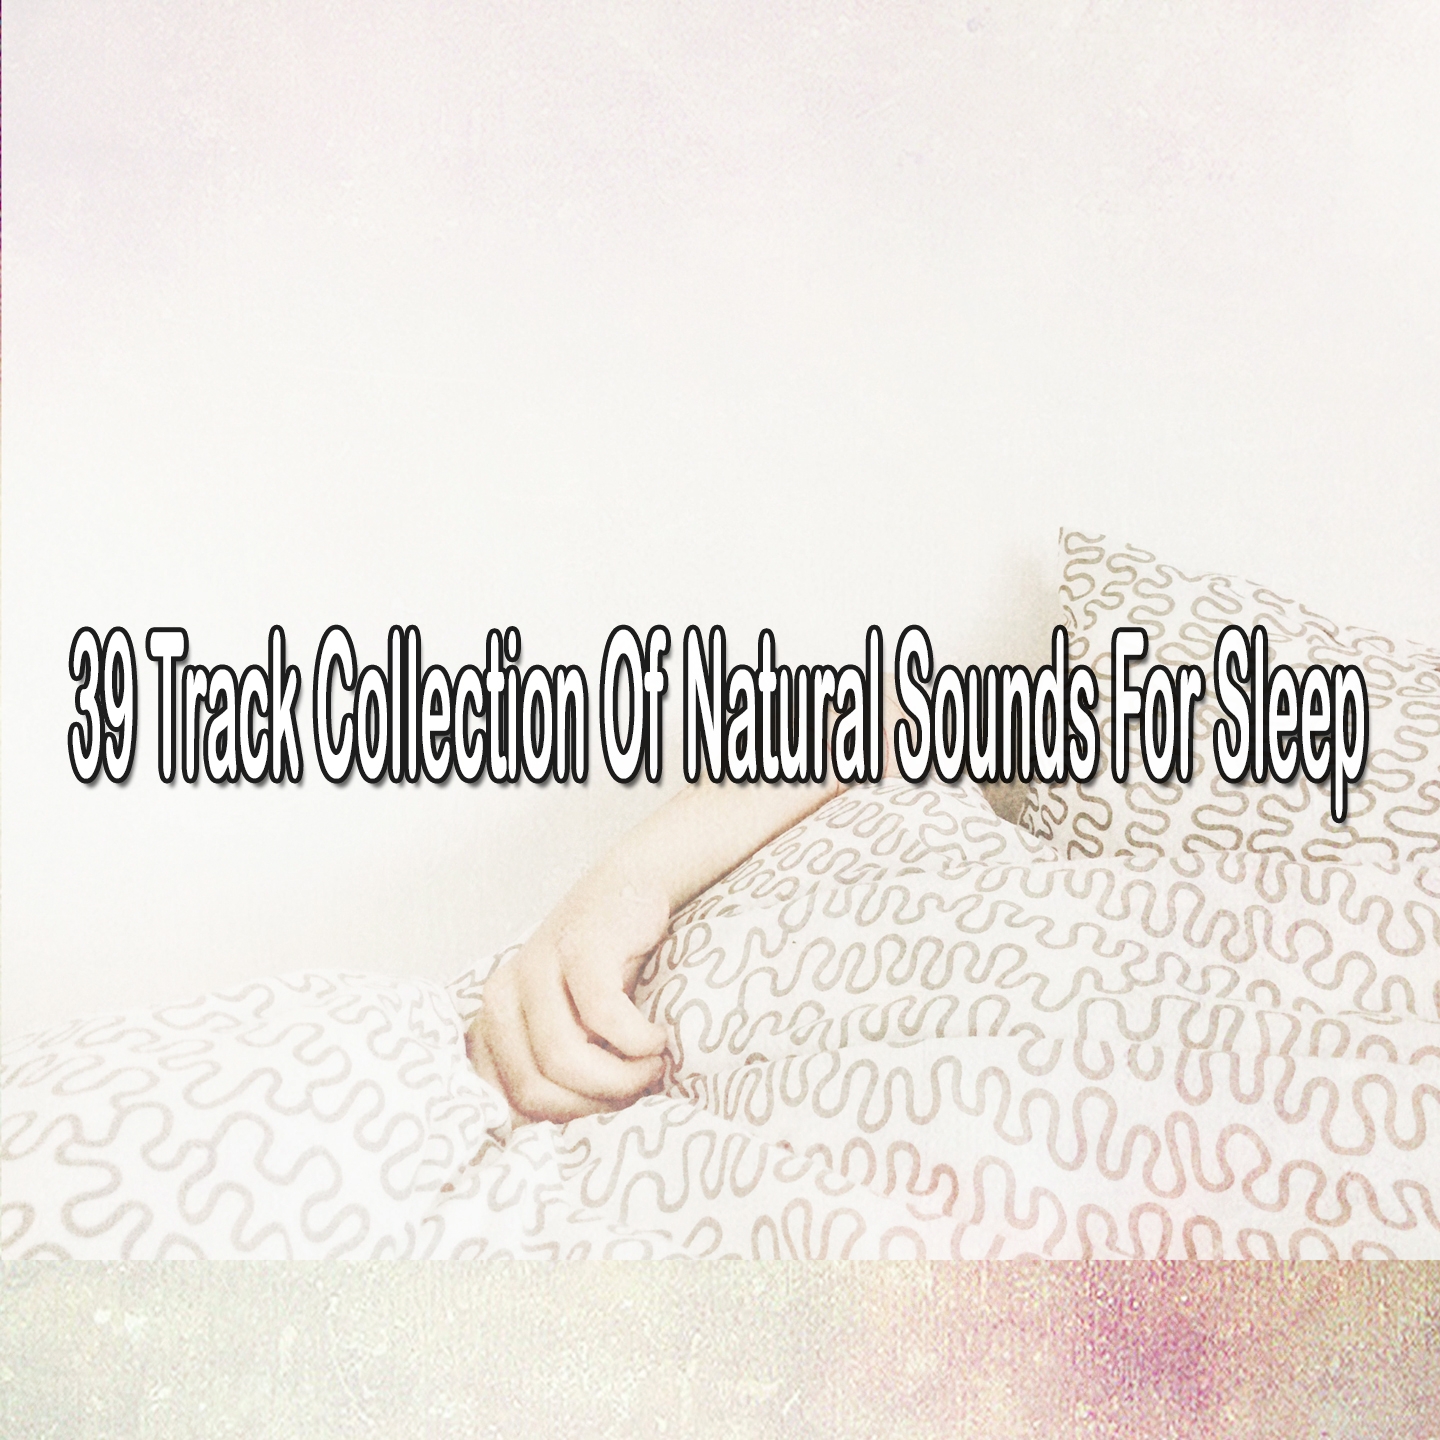 39 Track Collection Of Natural Sounds For Sleep